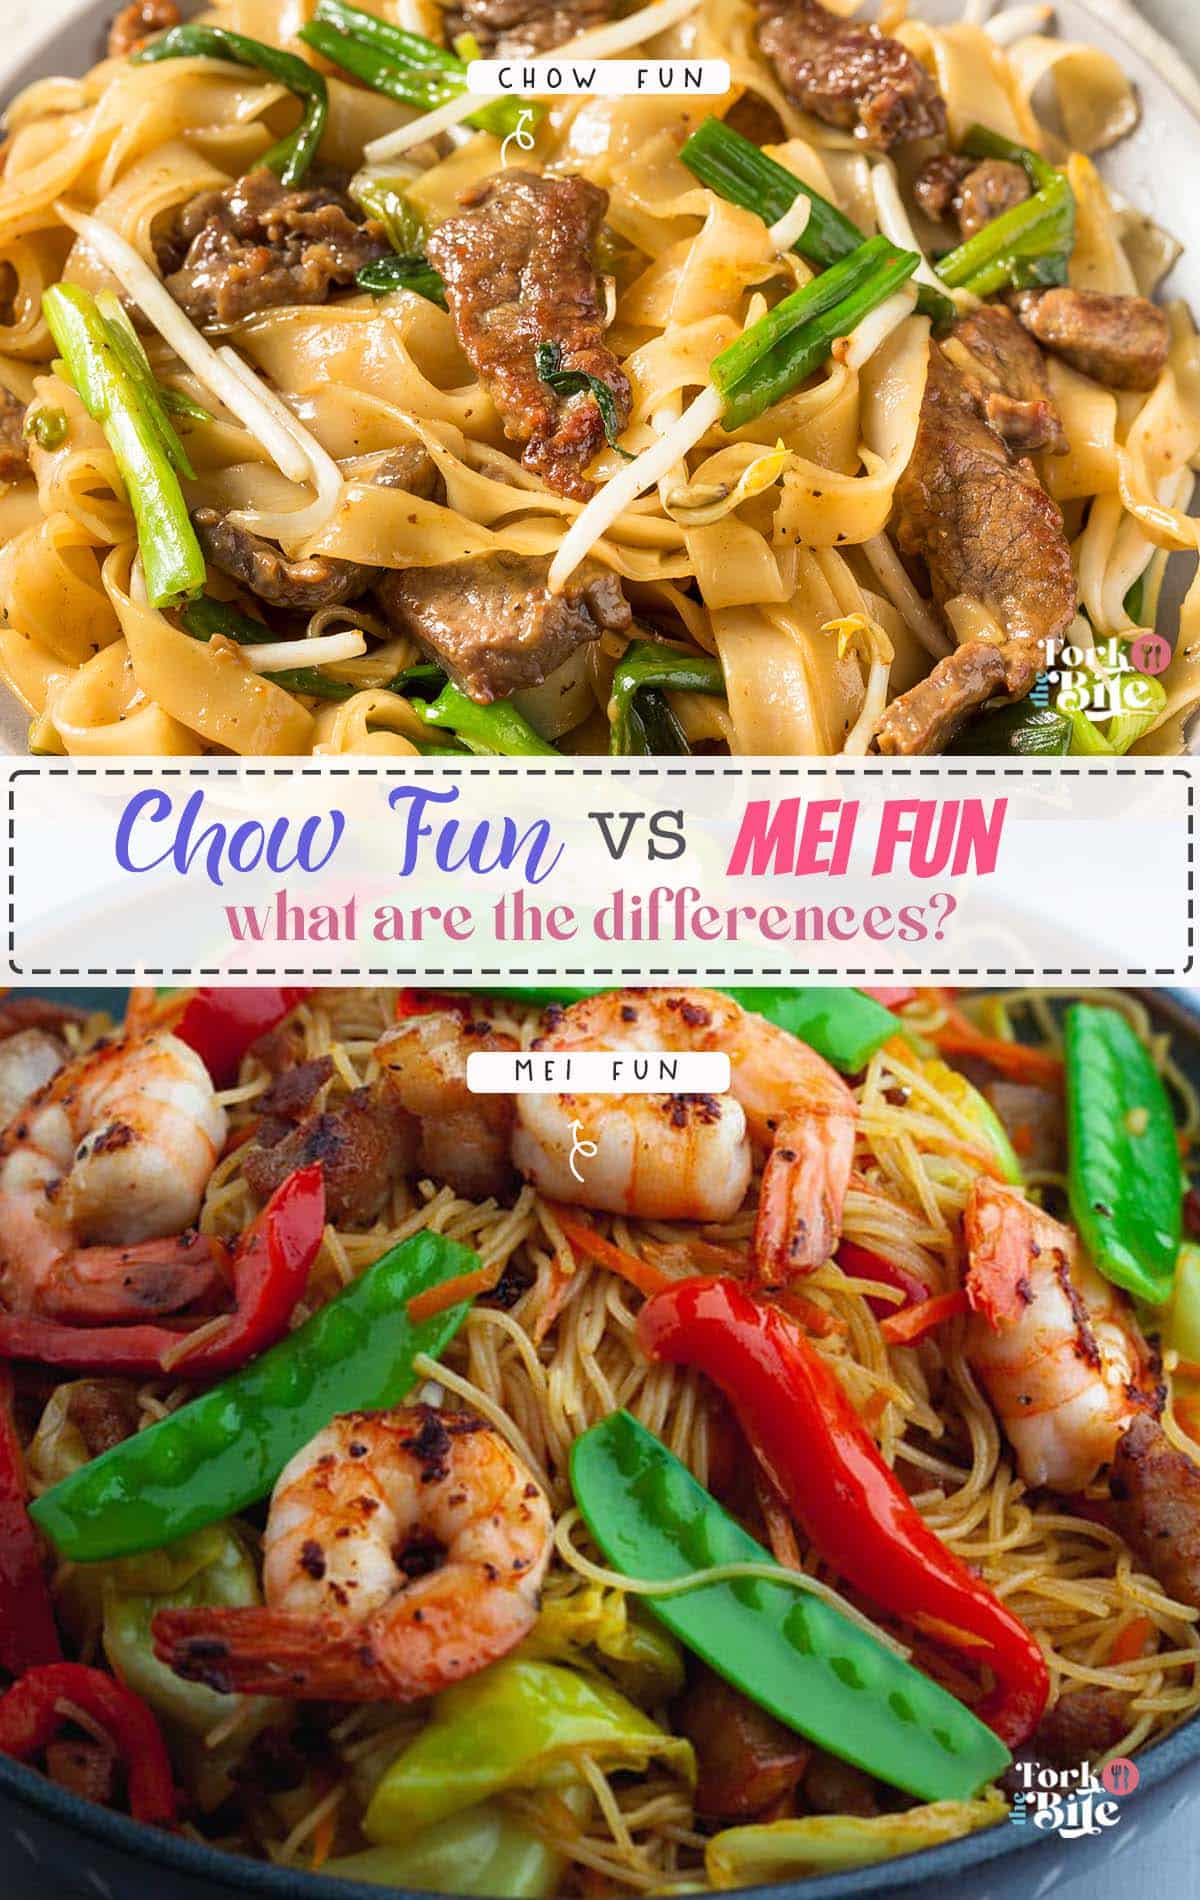 Chow Fun and Mei Fun are popular Chinese noodle dishes that often leave people wondering which is better. But which one should you choose? Chow Fun is a Cantonese dish made with wide rice noodles, while Mei Fun is a thinner version of the same dish.